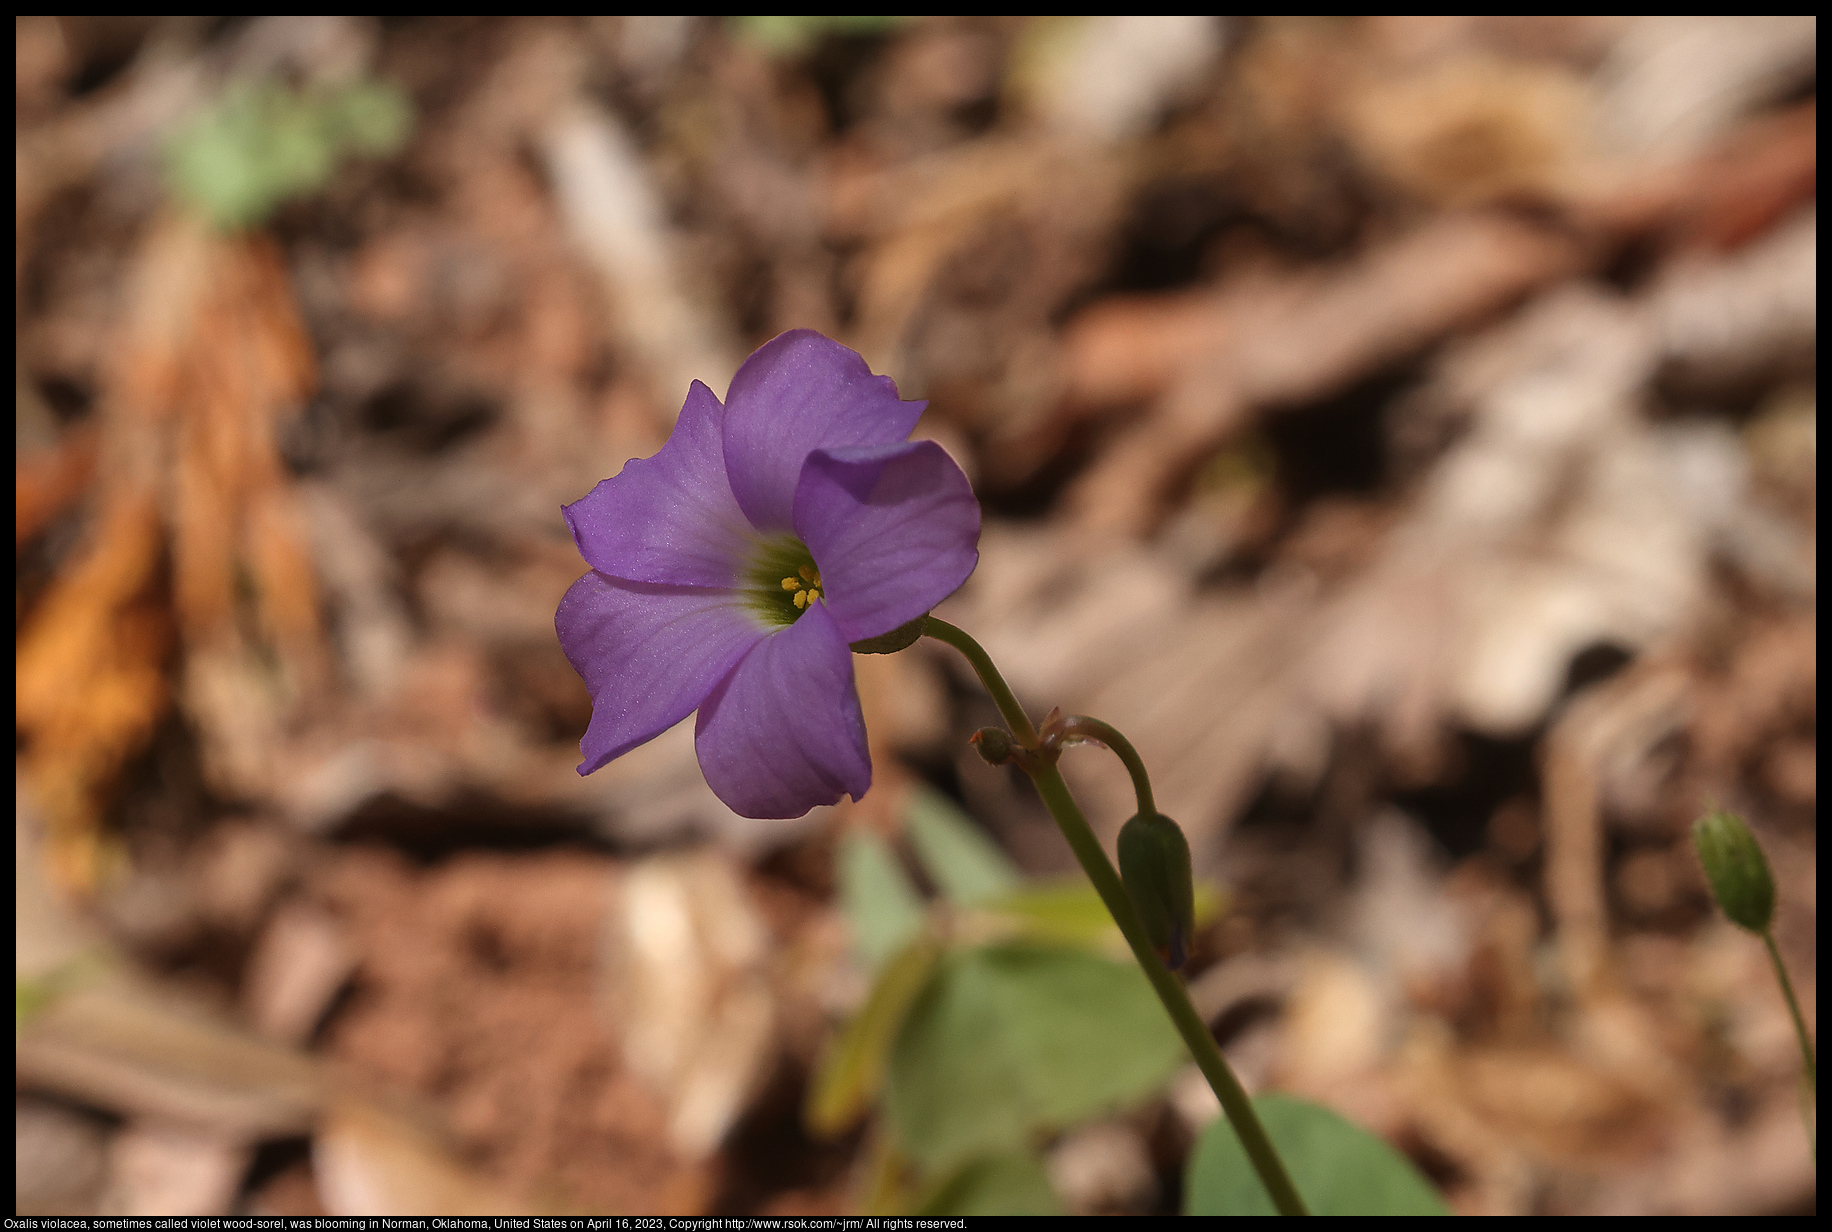 Oxalis violacea, sometimes called violet wood-sorel, was blooming in Norman, Oklahoma, United States on April 16, 2023